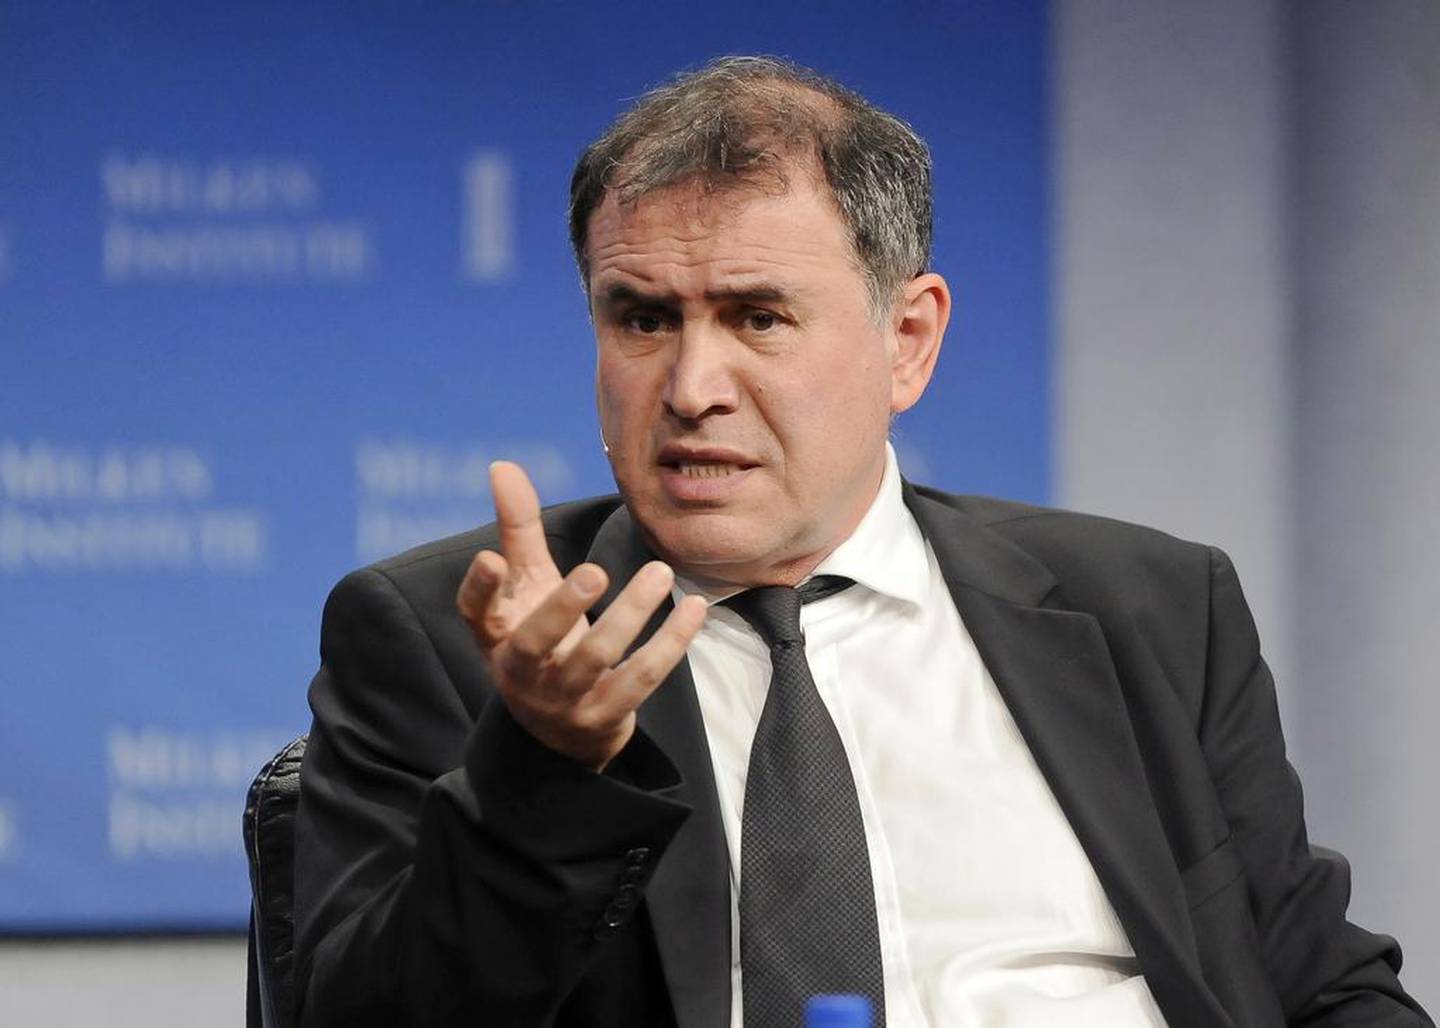 Something, which is volatile 5 to 10 per cent cannot be a currency, according to Nouriel Roubini. Reuters